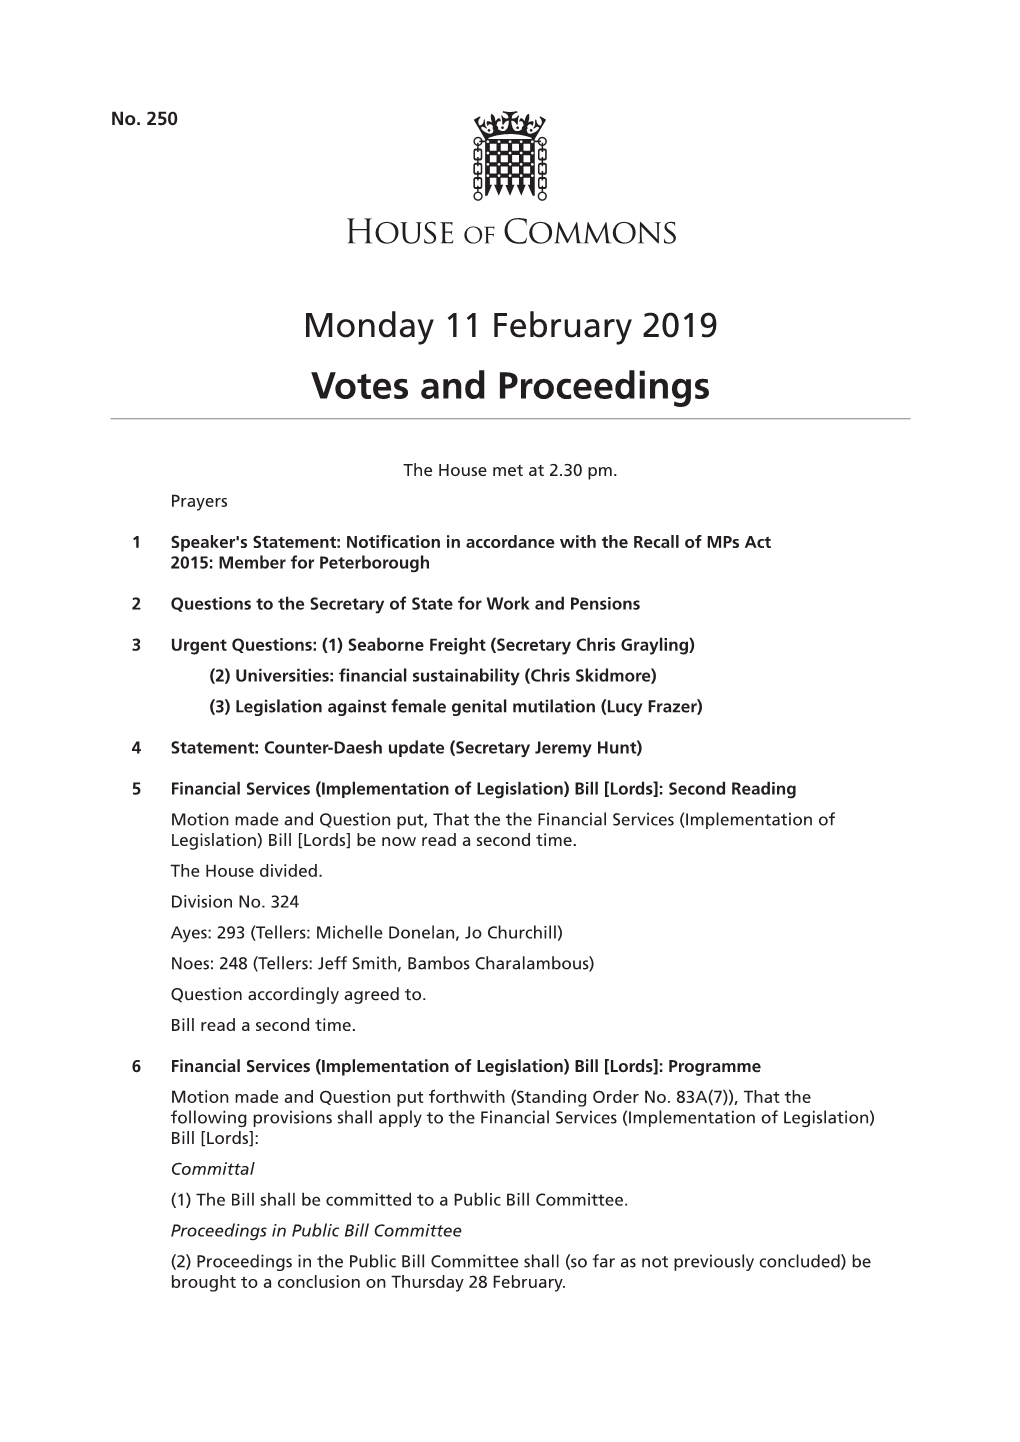 Votes and Proceedings for 11 Feb 2019